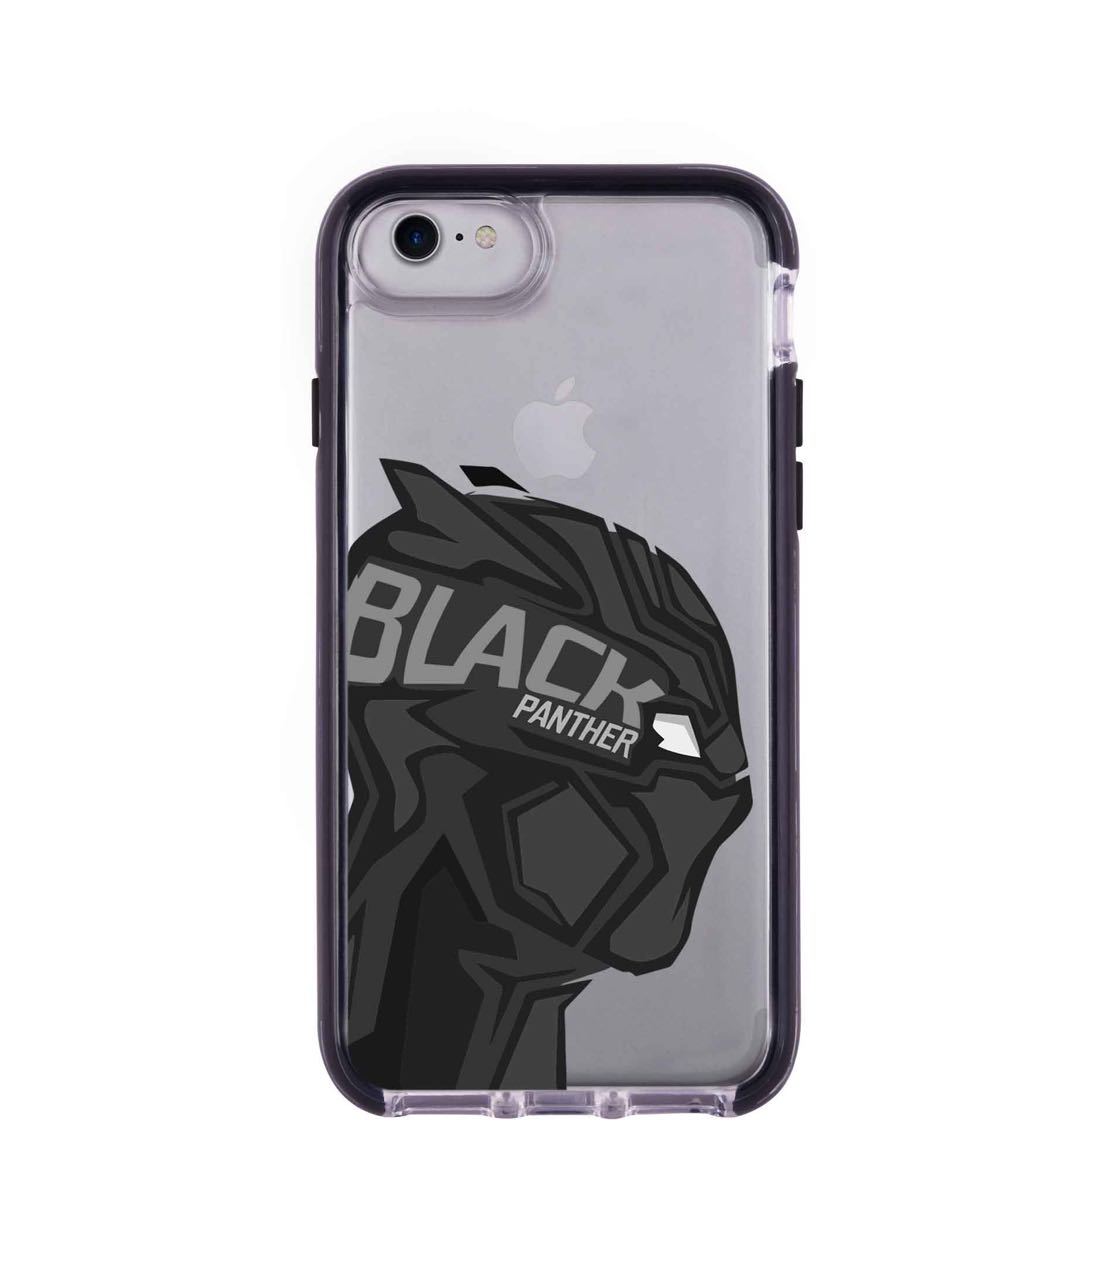 Black Panther Art - Extreme Phone Case for iPhone 7